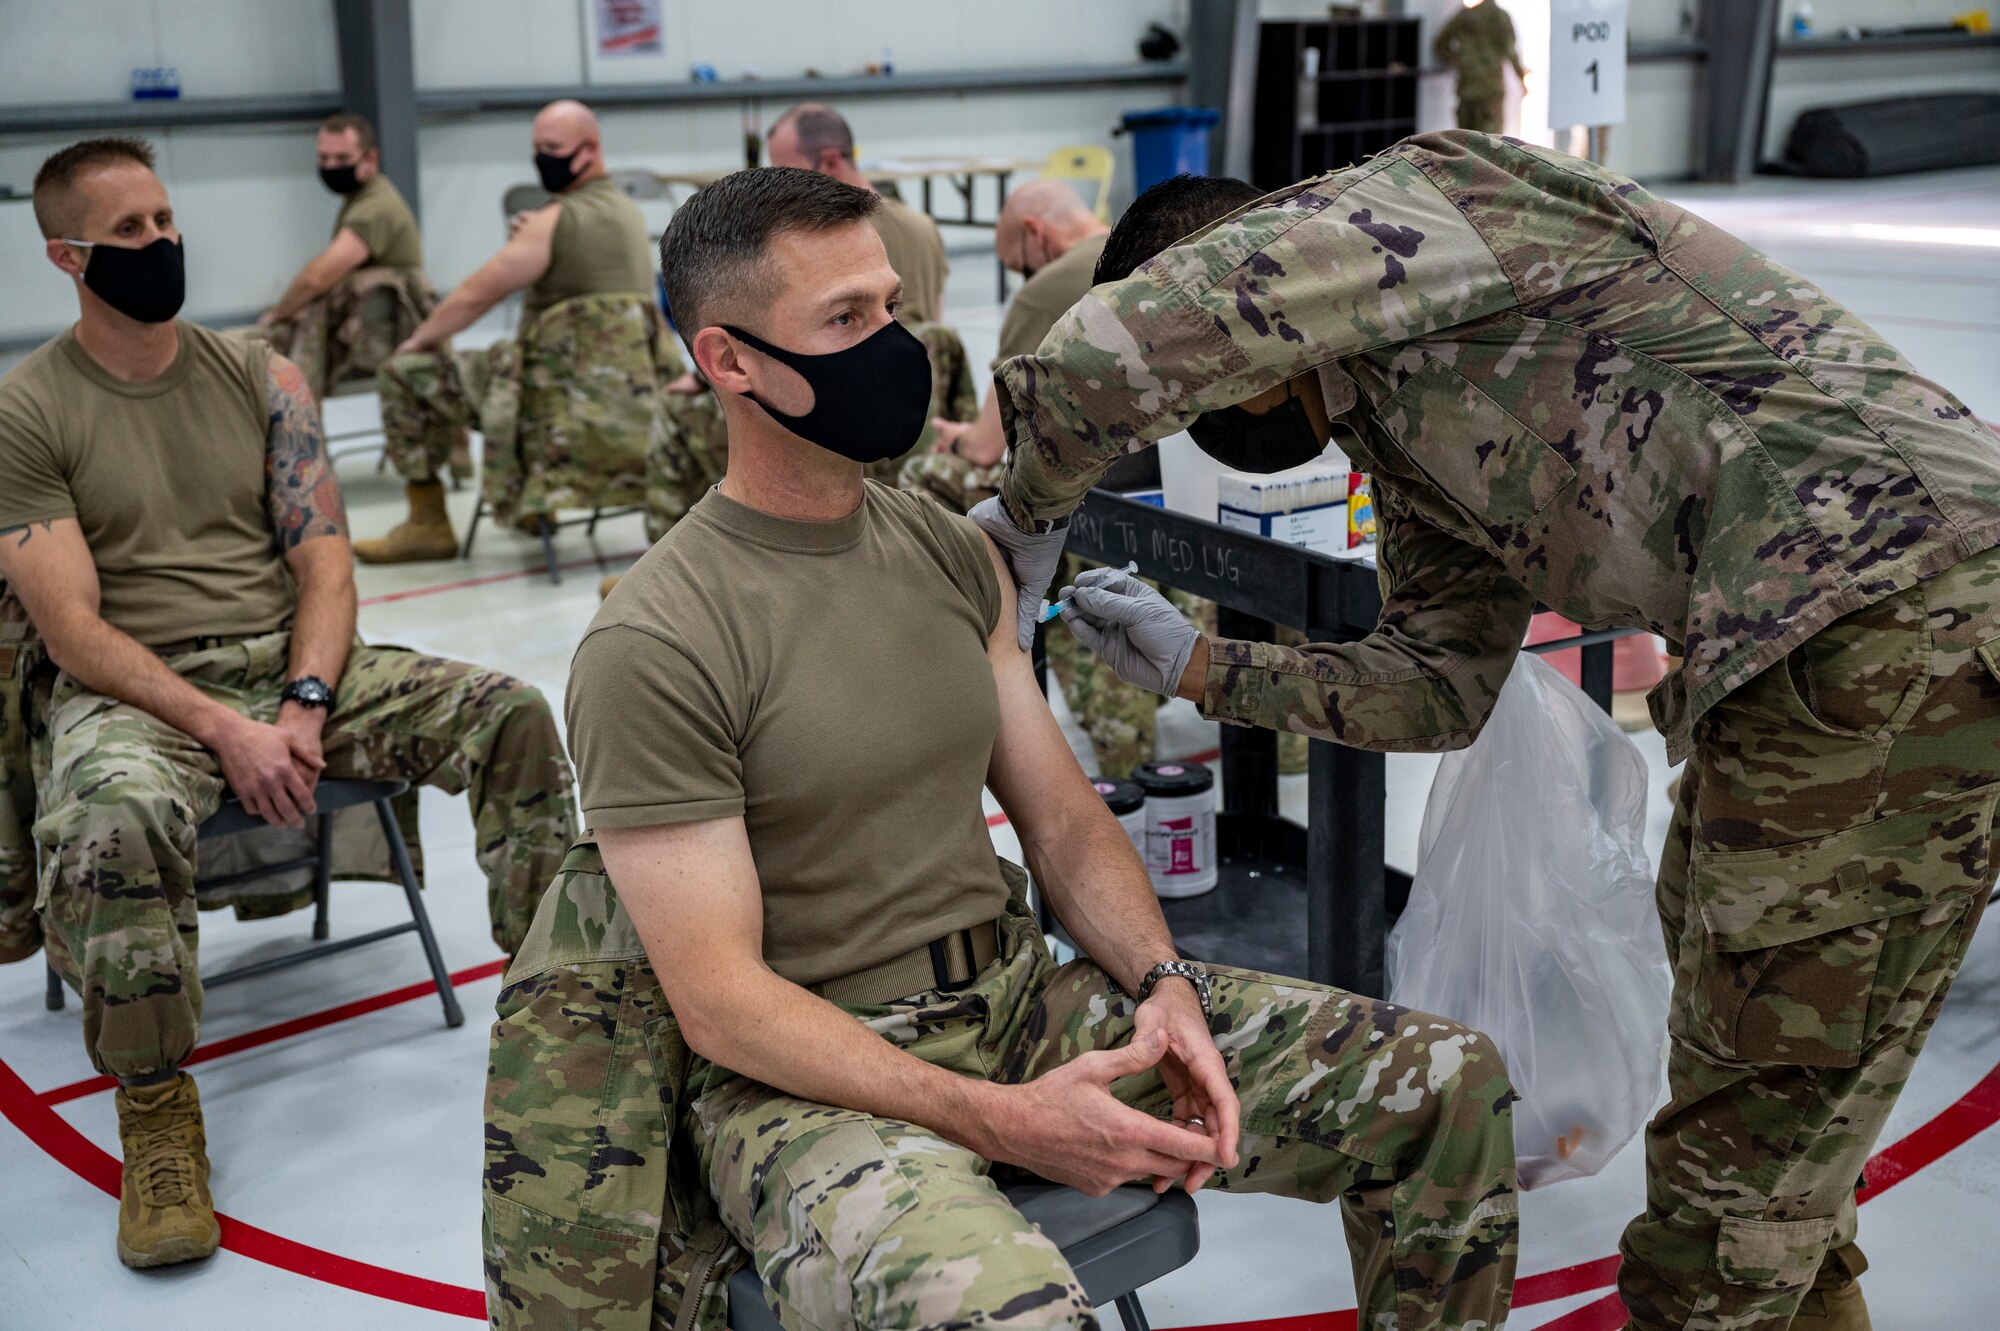 Brig. Gen. Larry Broadwell receives a COVID-19 vaccination